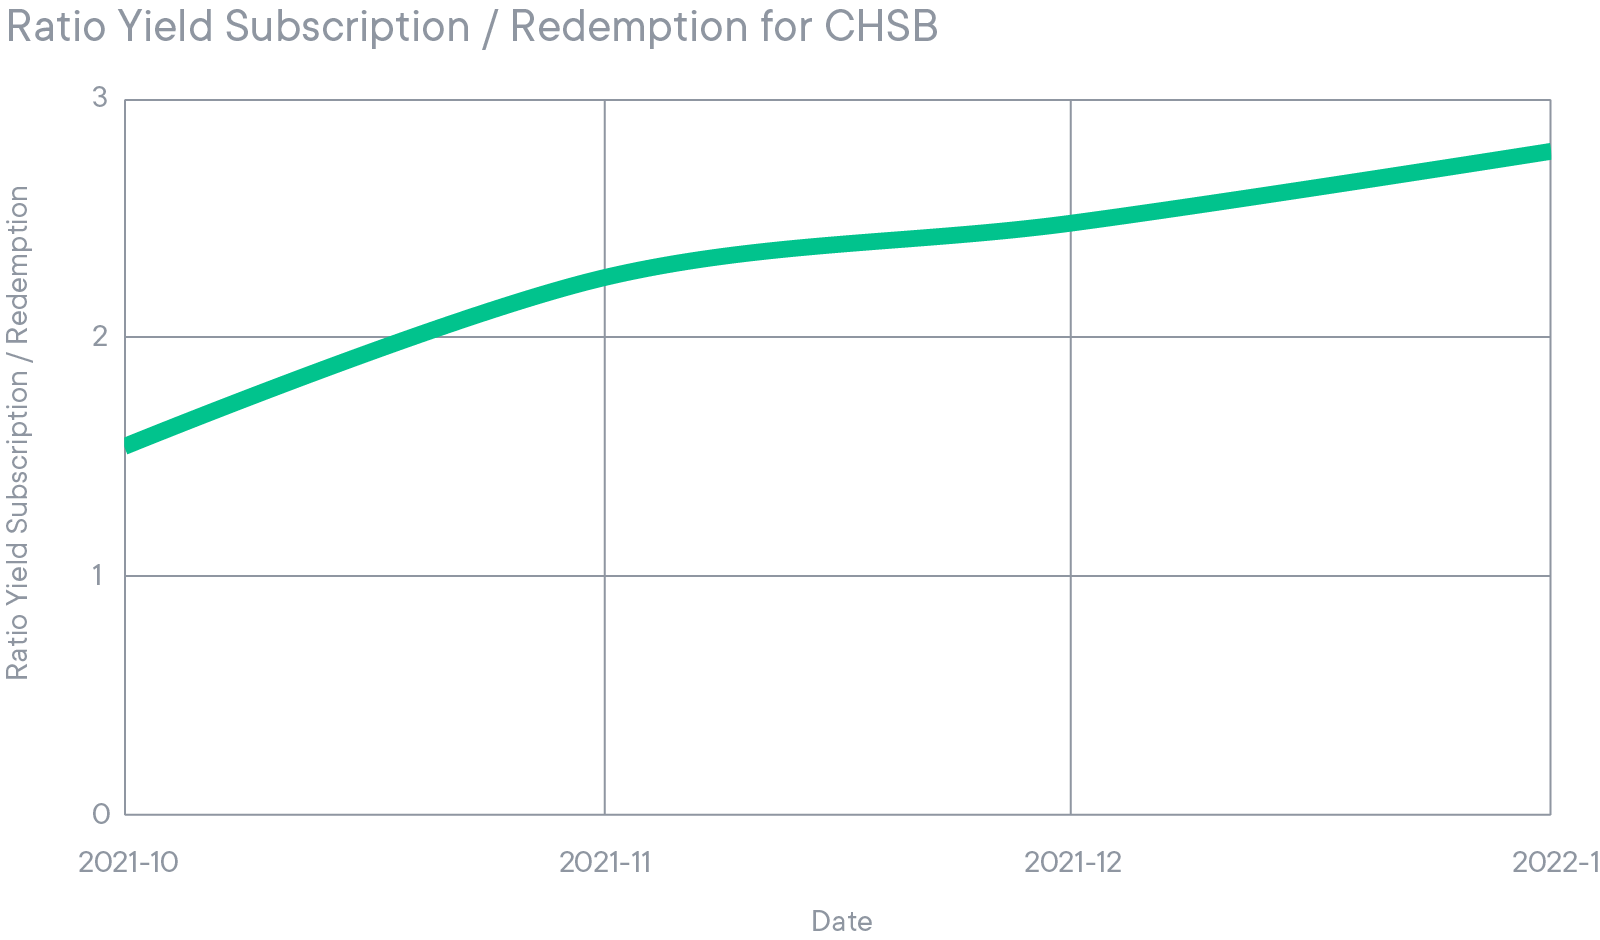 Ratio Yield Subscription / Redemption for CHSB 